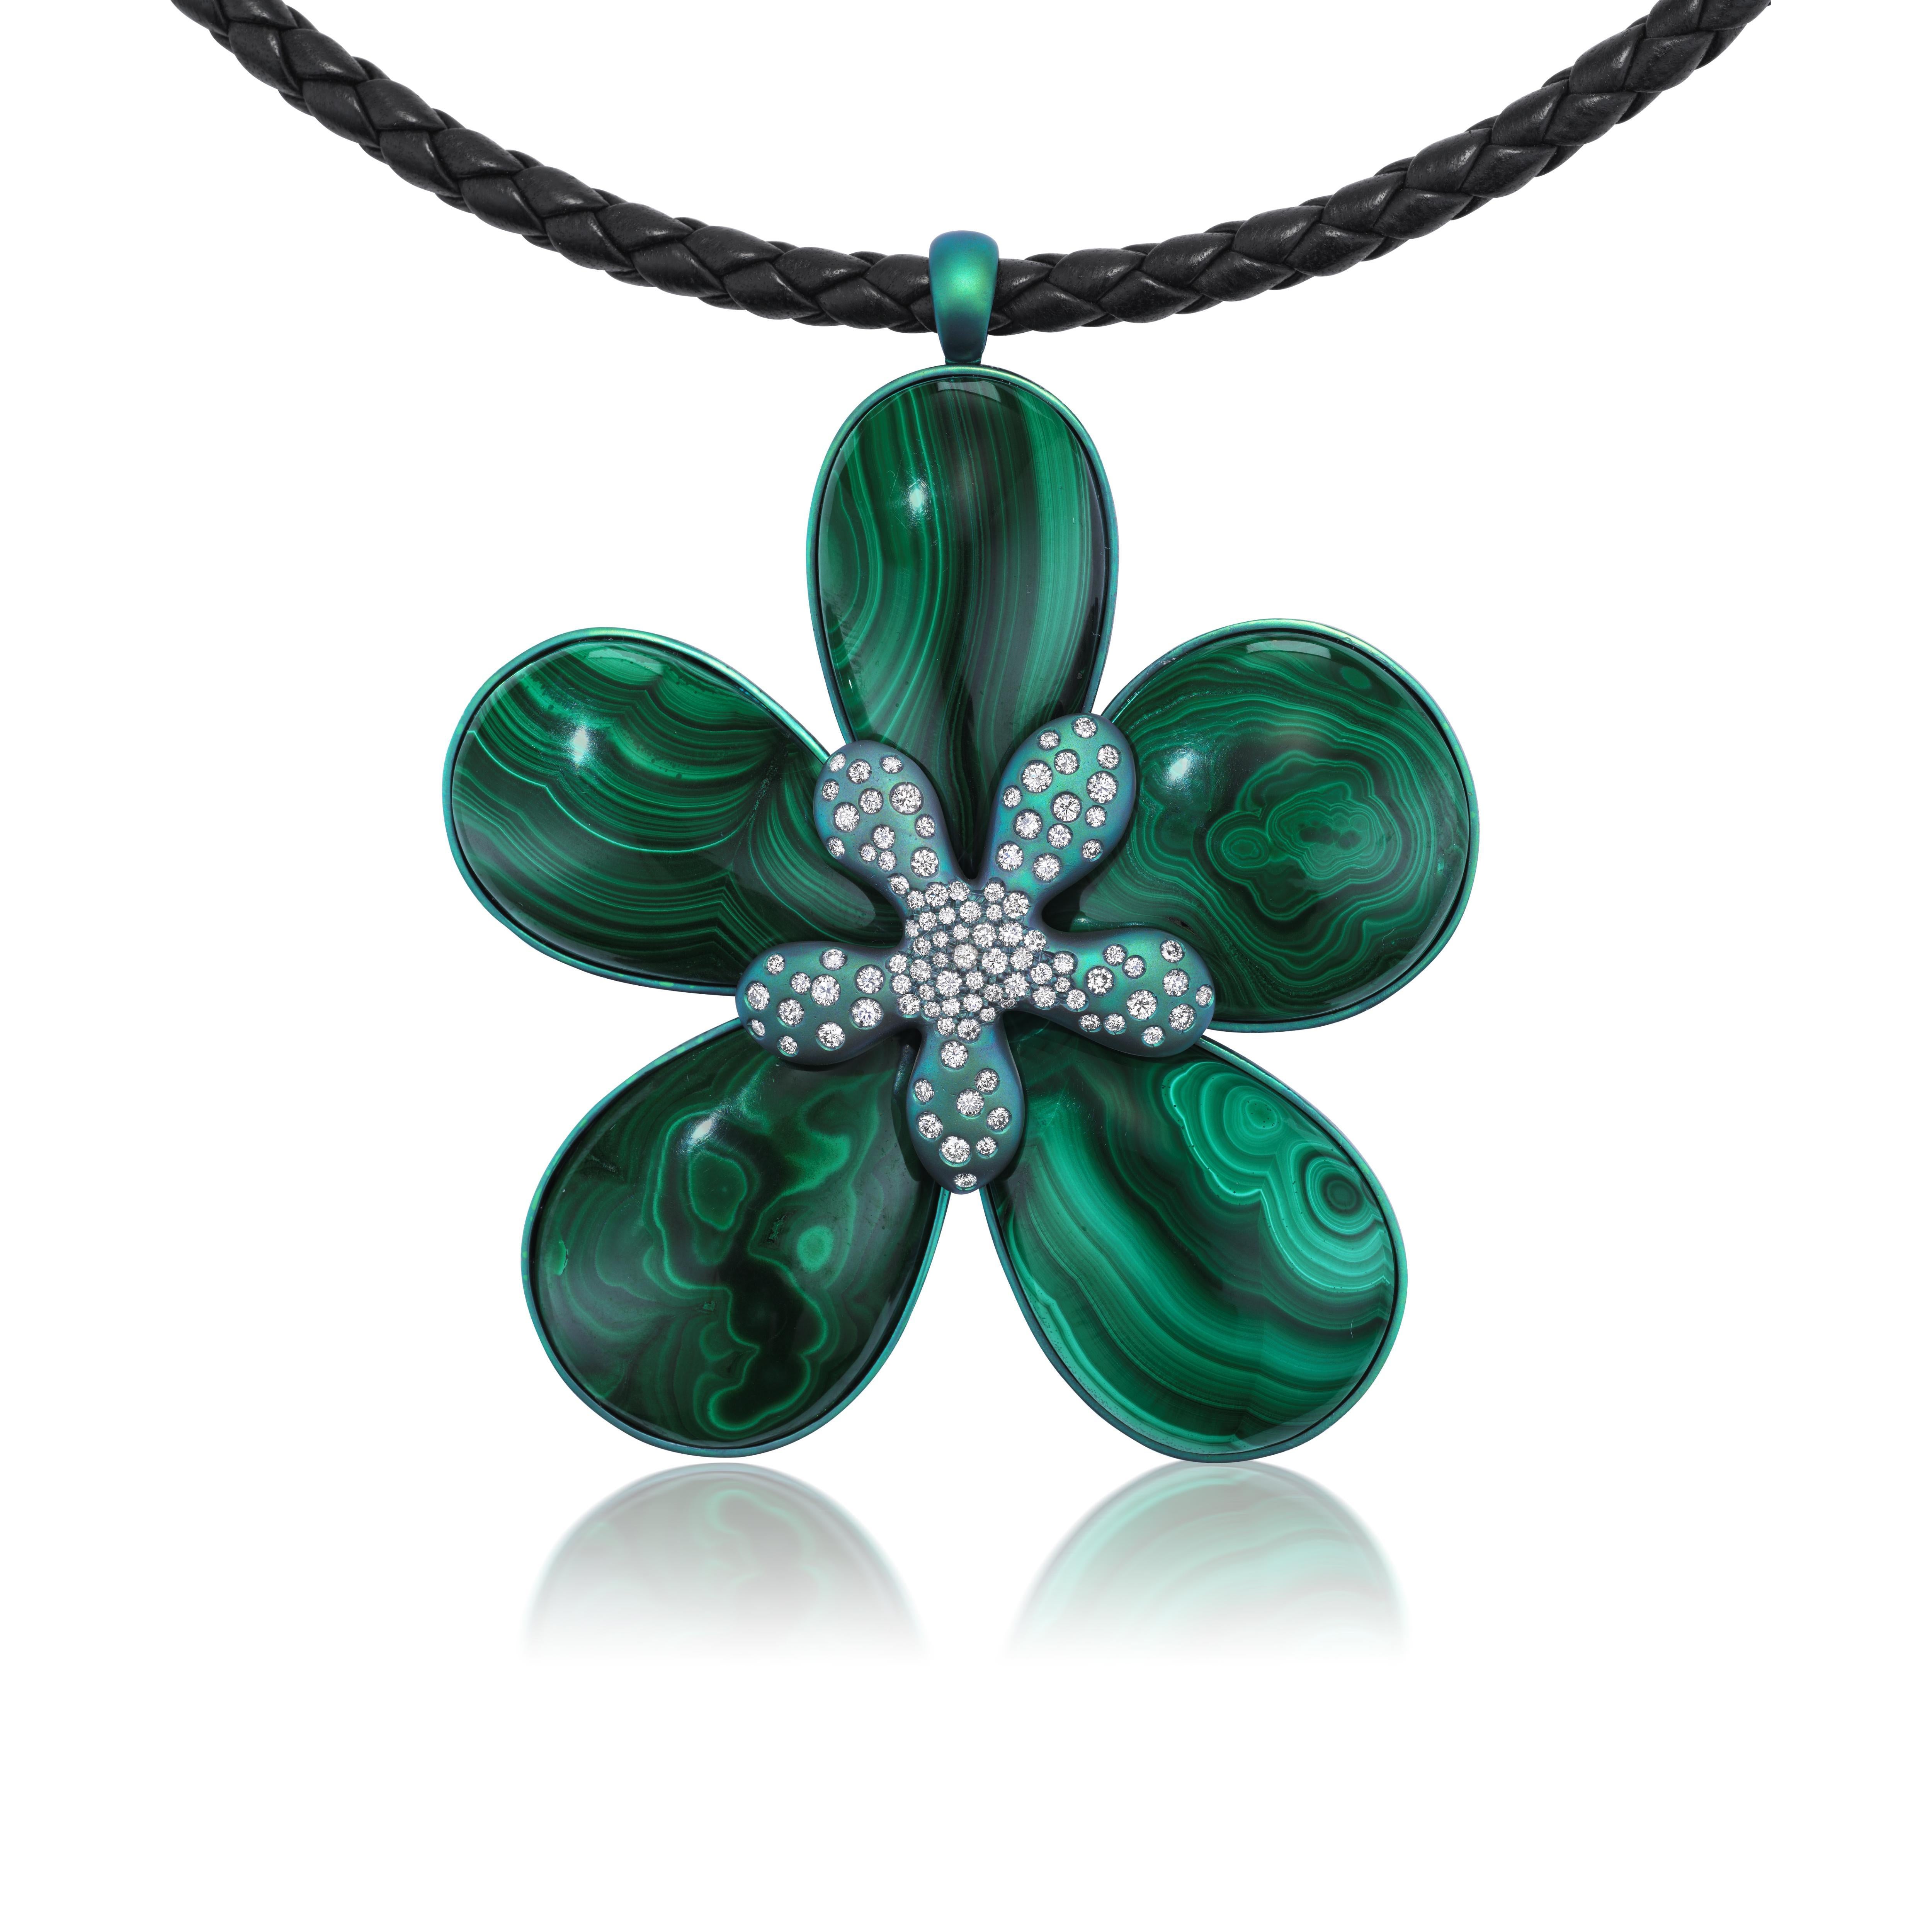 Make a striking statement with this truly unique necklace featuring a stunning combination of malachite and diamonds set in anodized green titanium. Each element of this exquisite piece harmonizes to create a captivating visual masterpiece that is